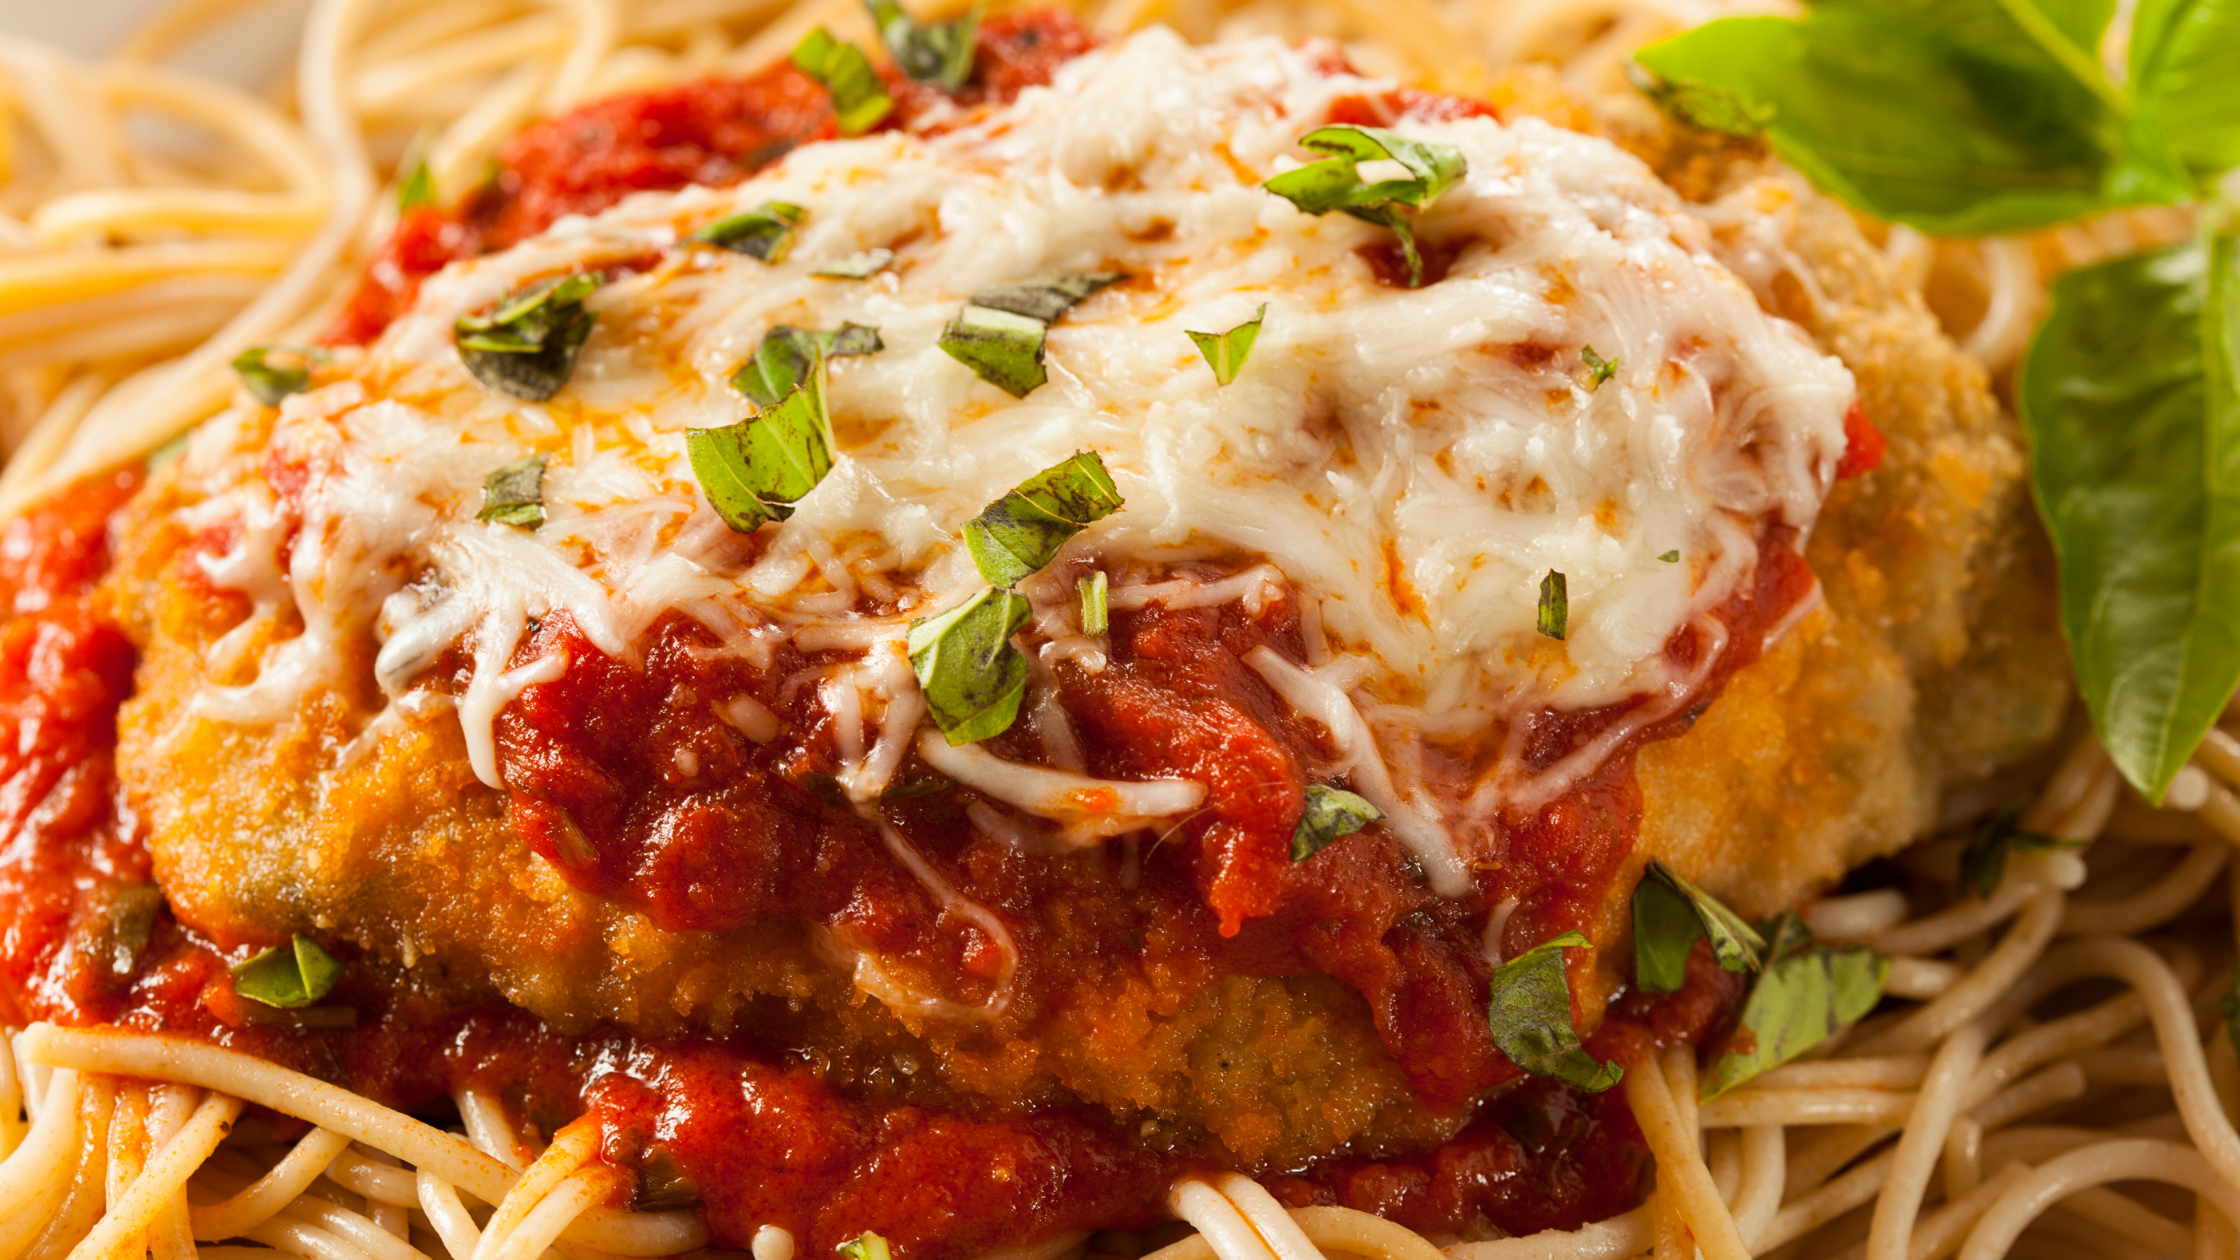 Low Calorie Chicken Parmesan with Whole Grain Spaghetti: A Healthy Recipe for Delicious Italian Food 9